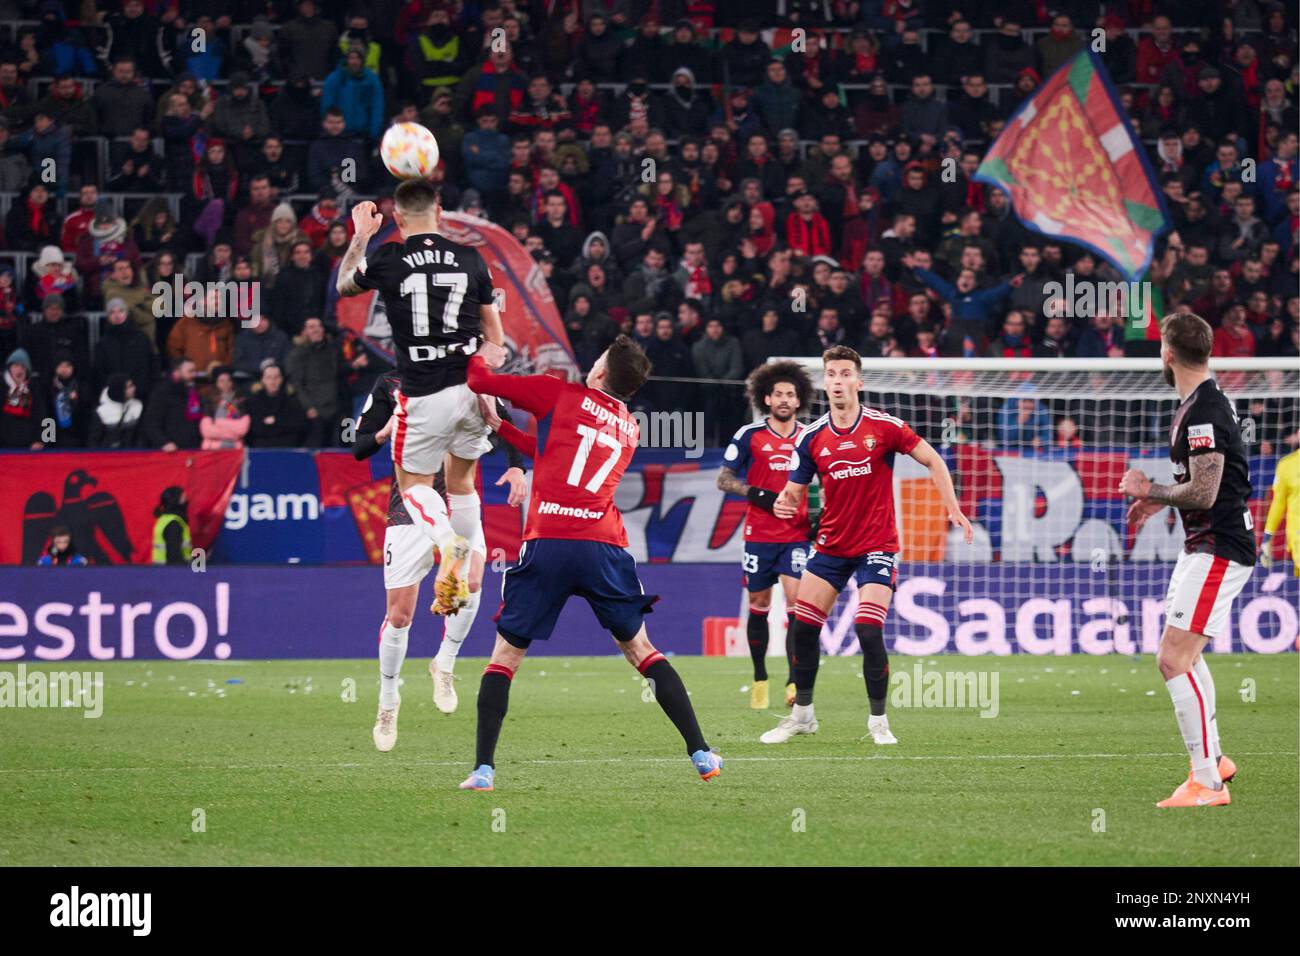 Pamplona, Spain. 1st Mar, 2023. Sports. Football/Soccer. First leg football match of the semifinal of the Copa del Rey between CA Osasuna and Athletic Club played at El Sadar stadium in Pamplona (Spain) on March 1, 2023. 900/Cordon Press Credit: CORDON PRESS/Alamy Live News Stock Photo